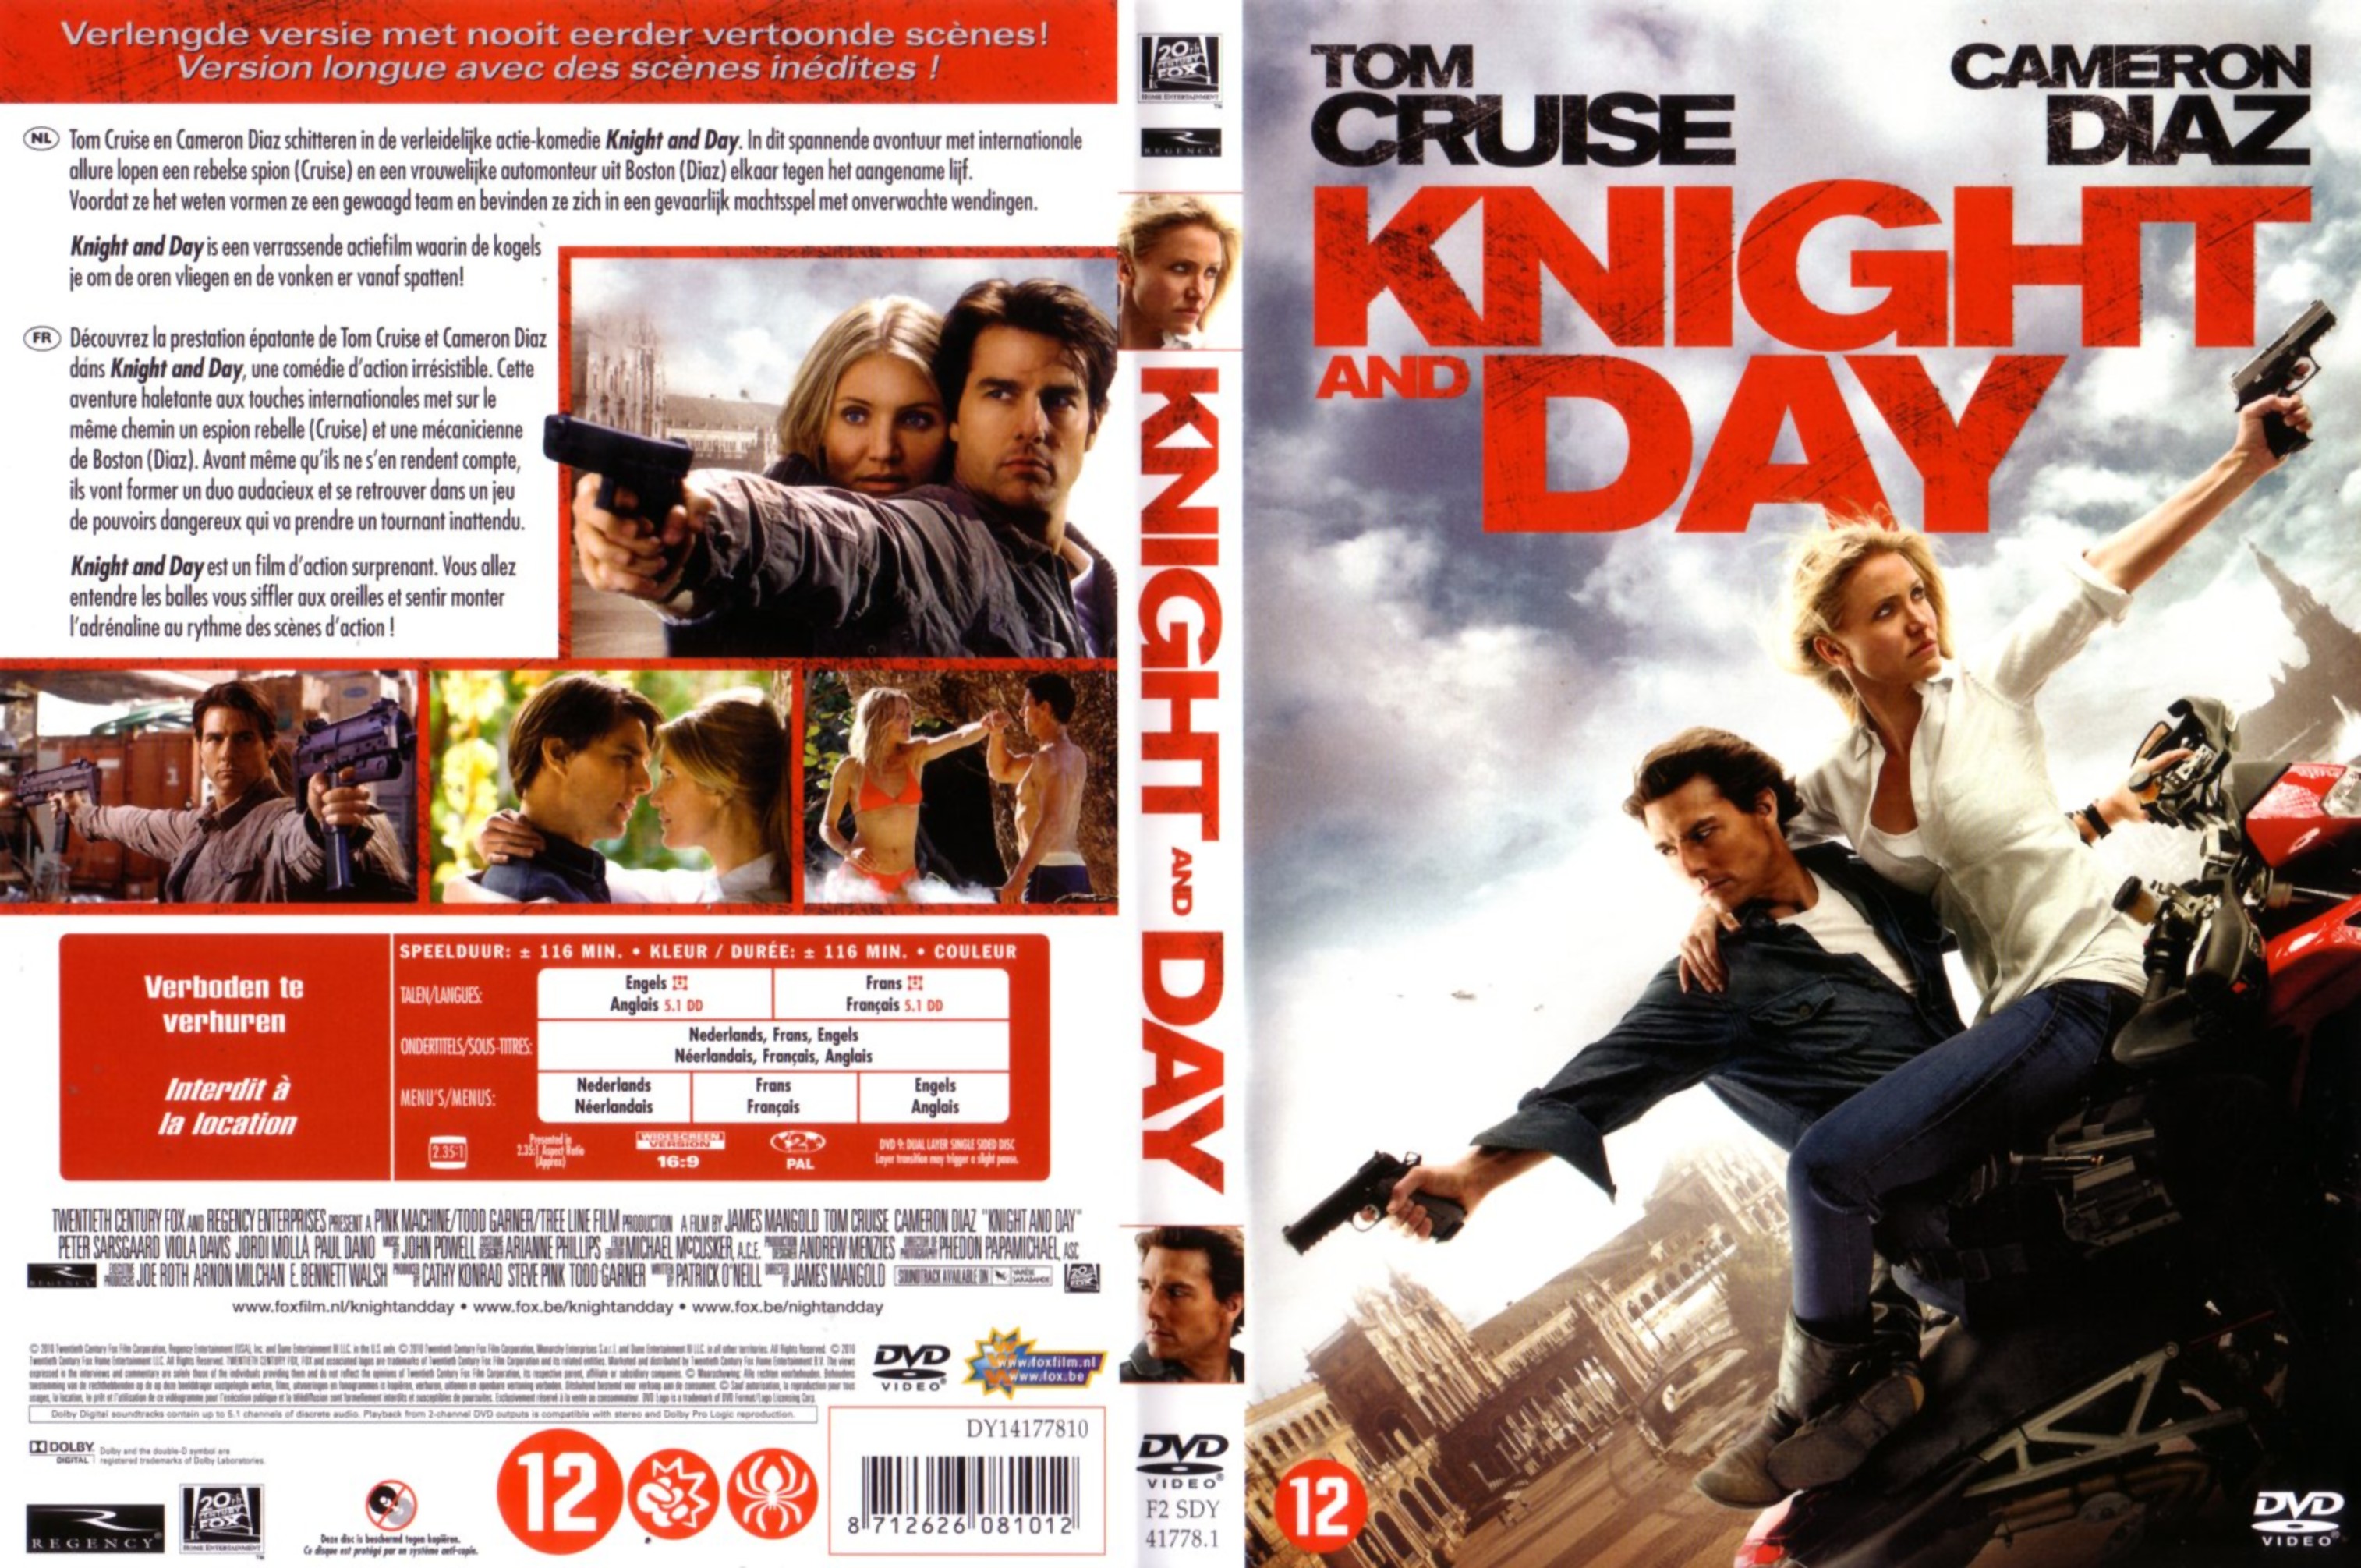 Jaquette DVD Knight and day